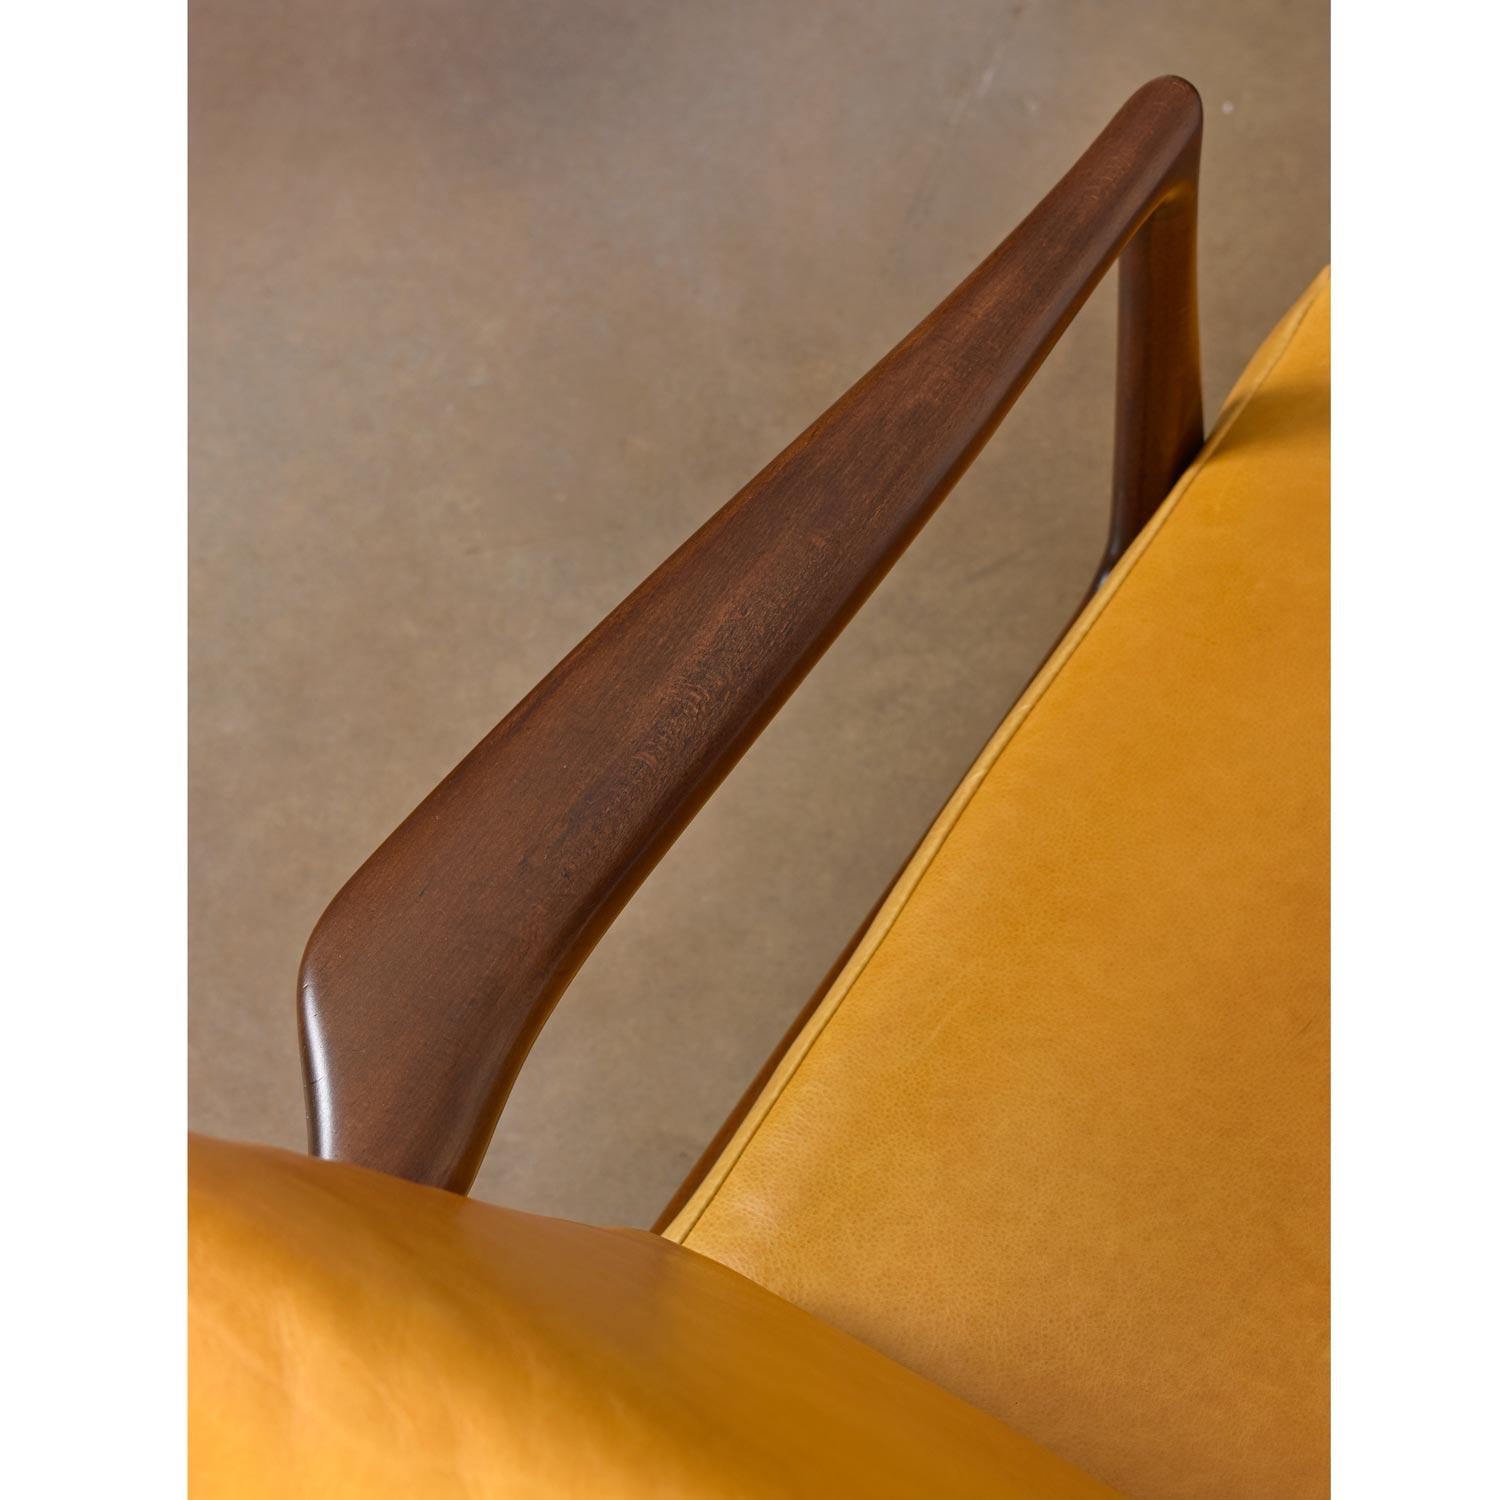 Mid-20th Century Vintage Danish Modern Ib Kofod-Larsen Sculpted Blade Arm Lounge Chair for Selig